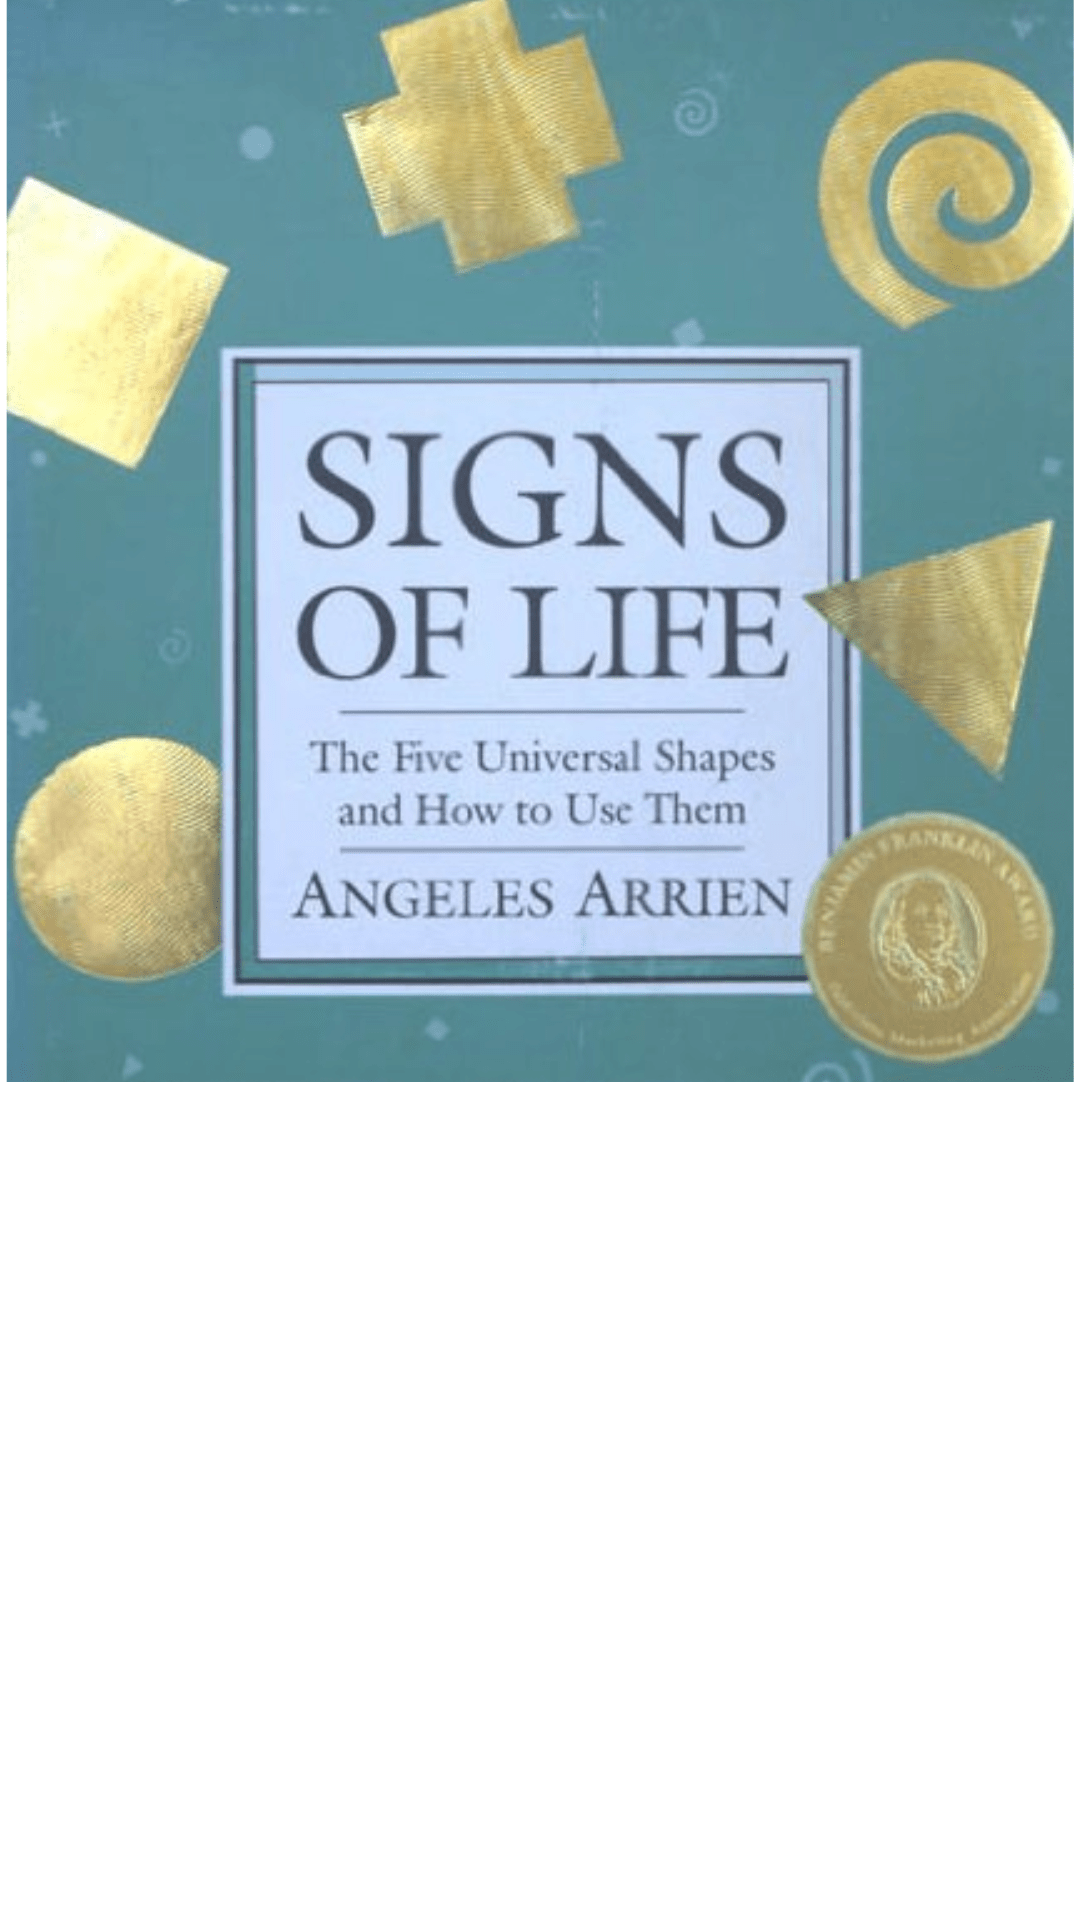 Signs of Life by Angeles Arrien